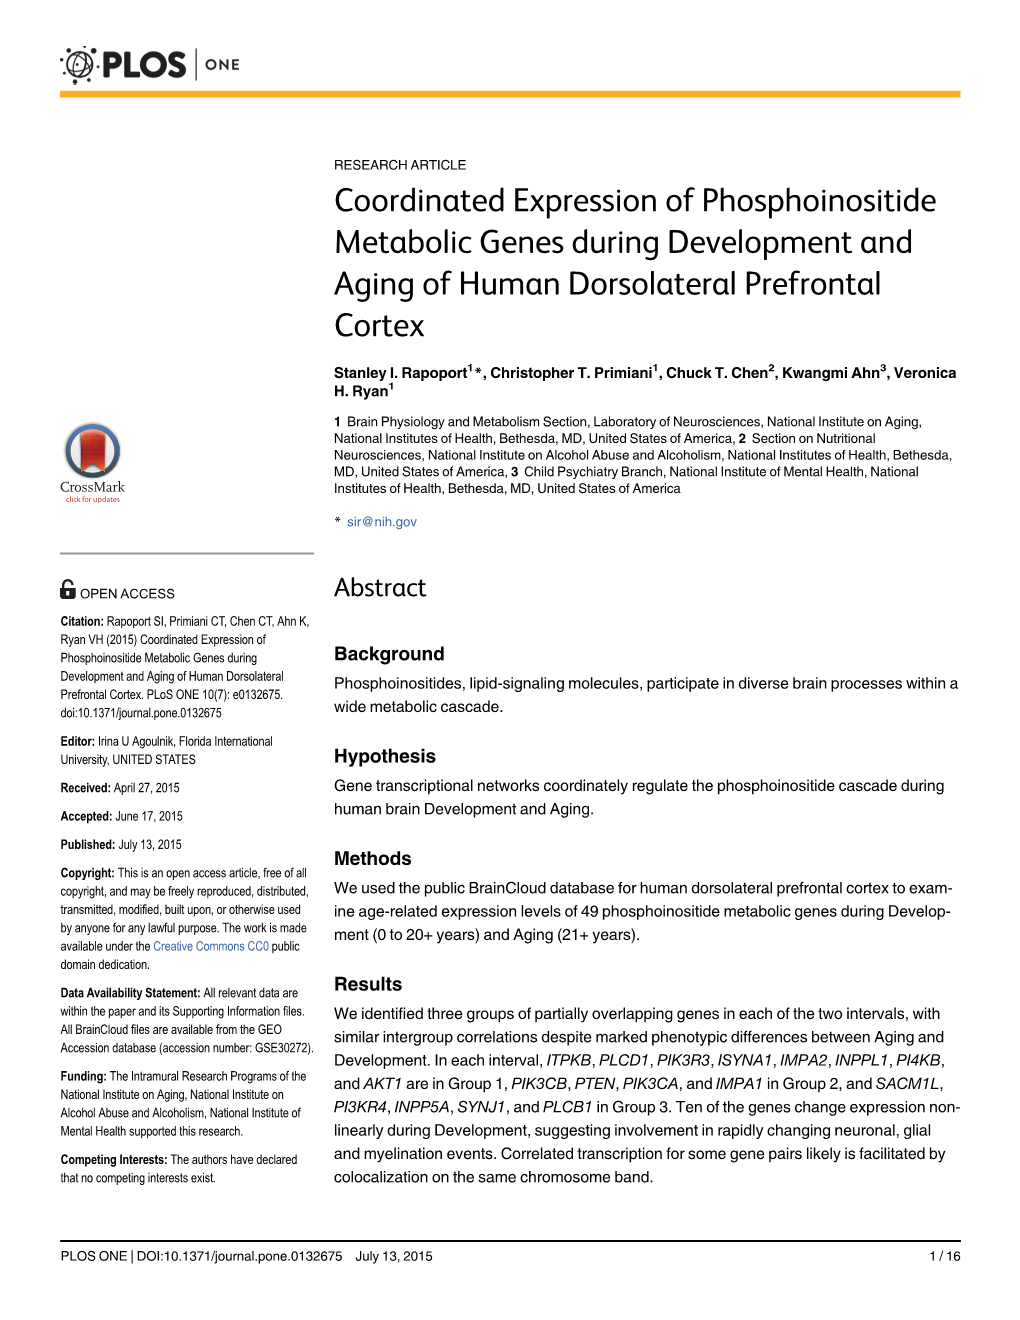 Coordinated Expression of Phosphoinositide Metabolic Genes During Development and Aging of Human Dorsolateral Prefrontal Cortex